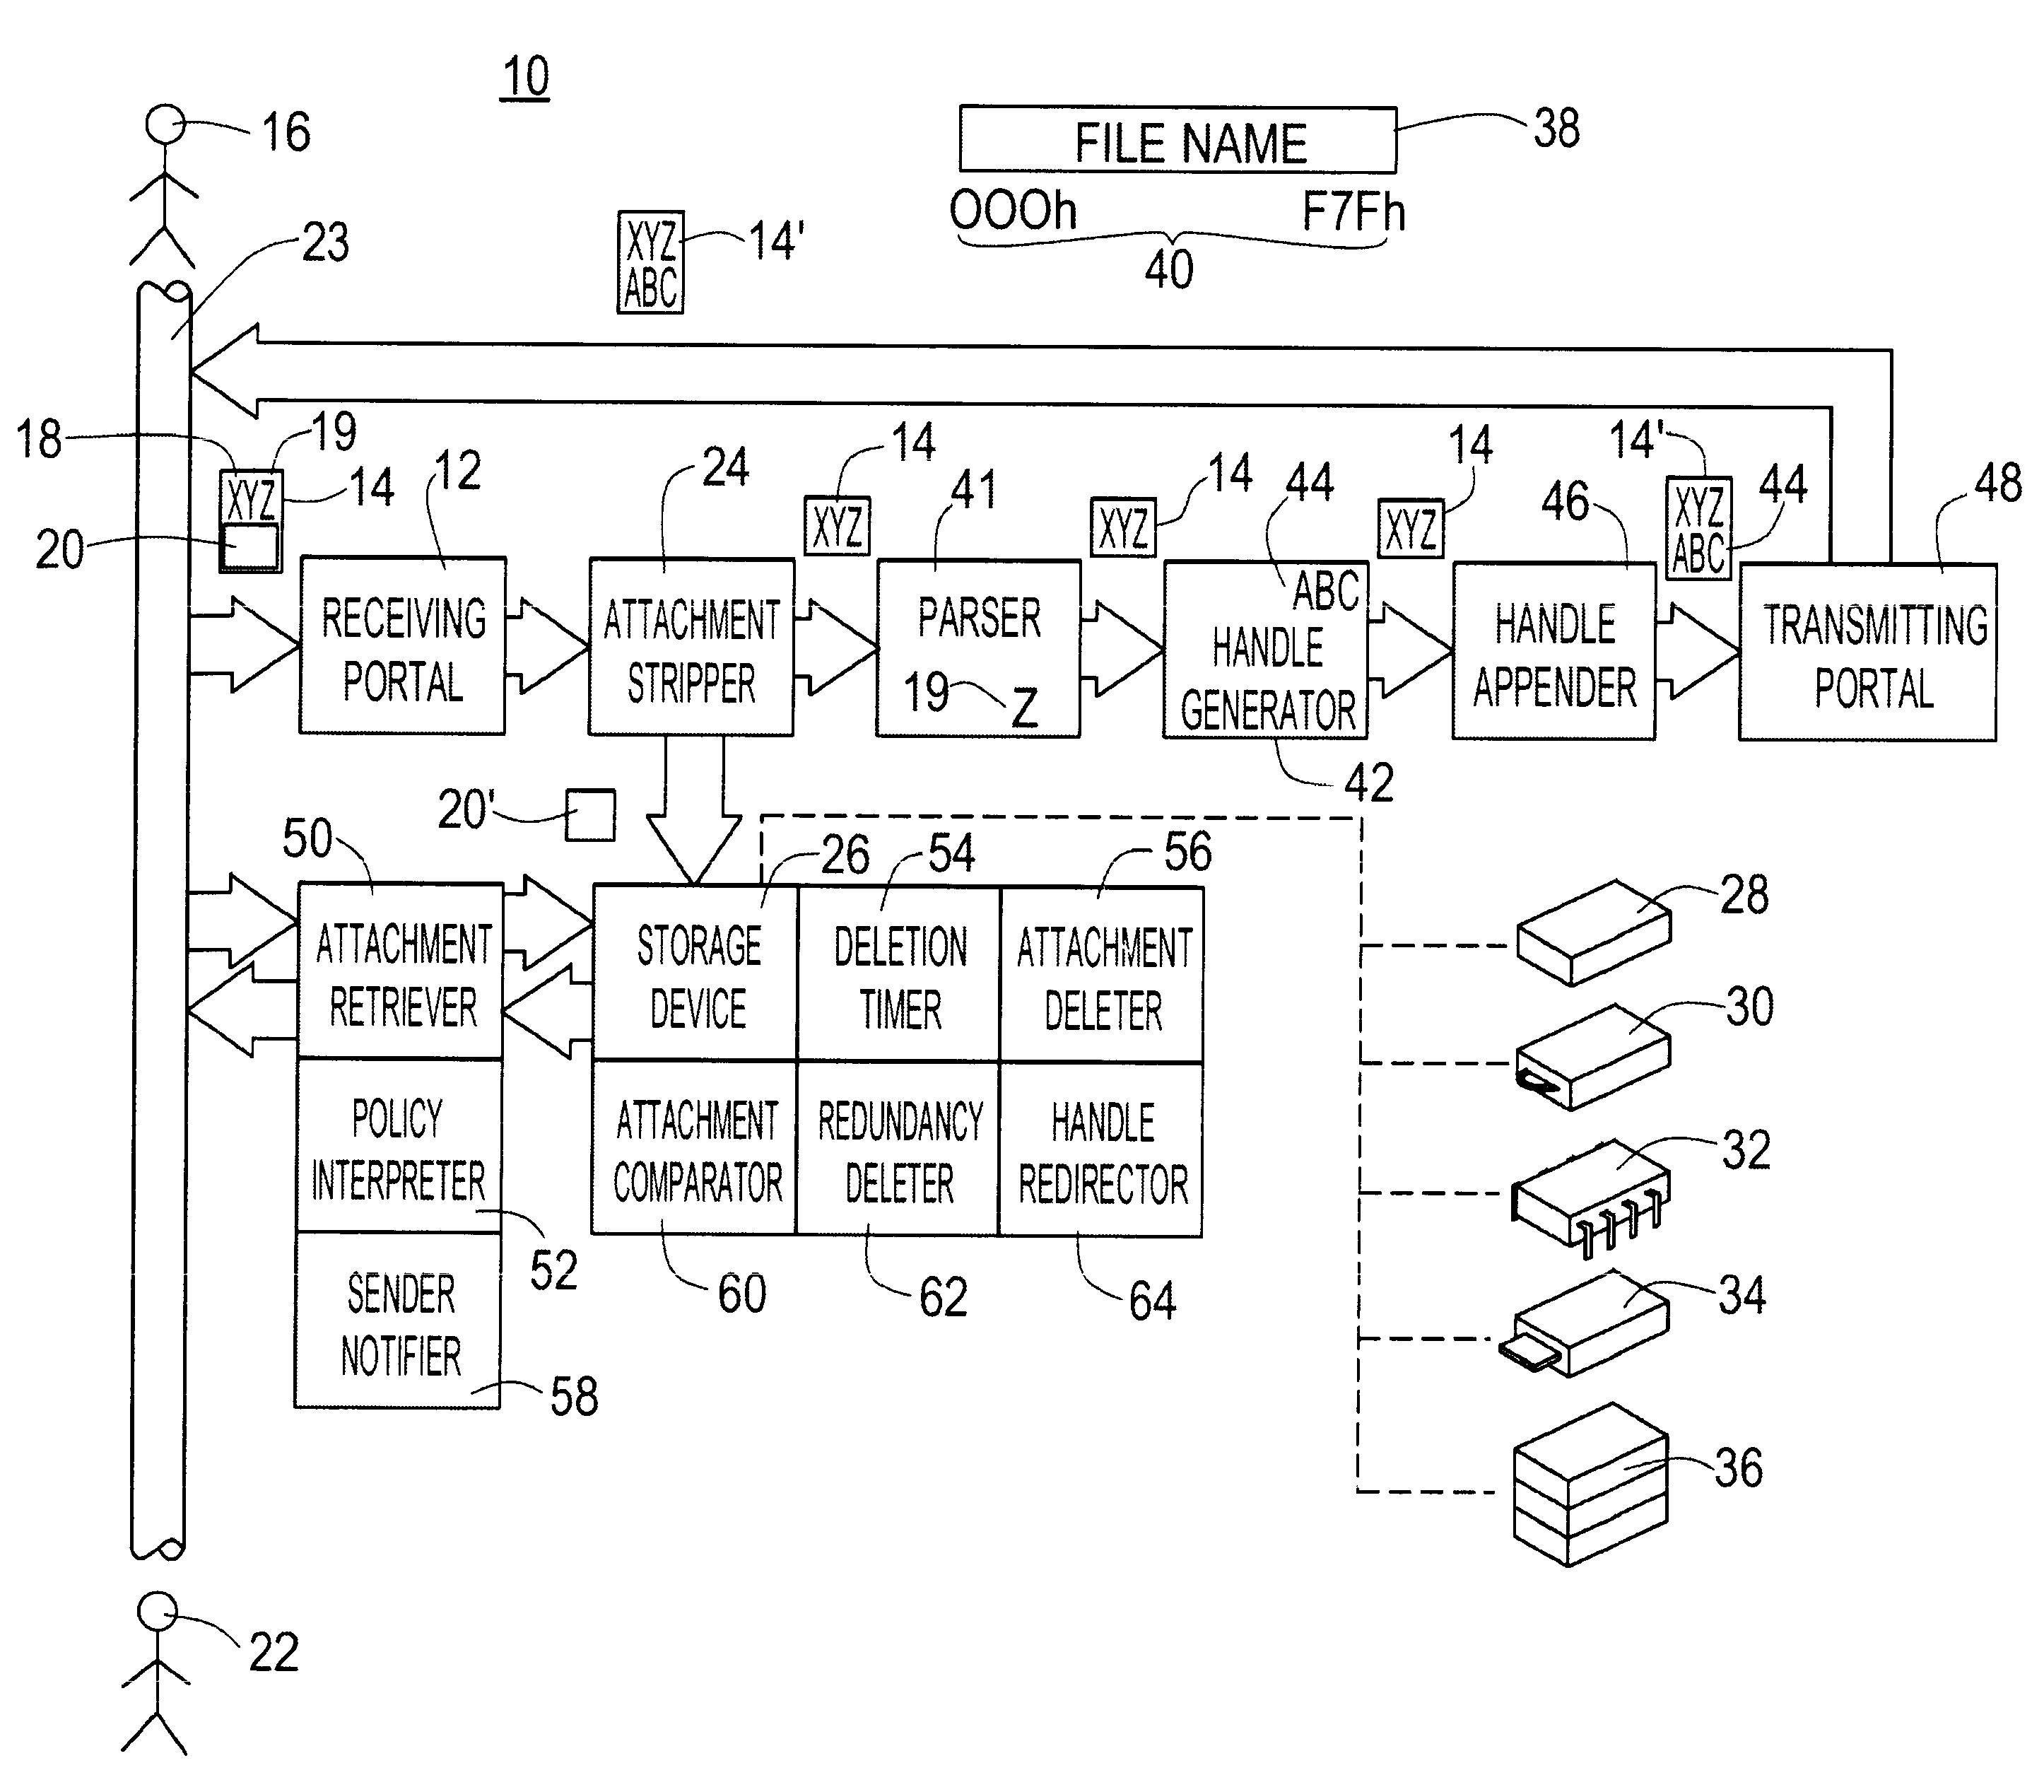 Network-based mail attachment storage system and method